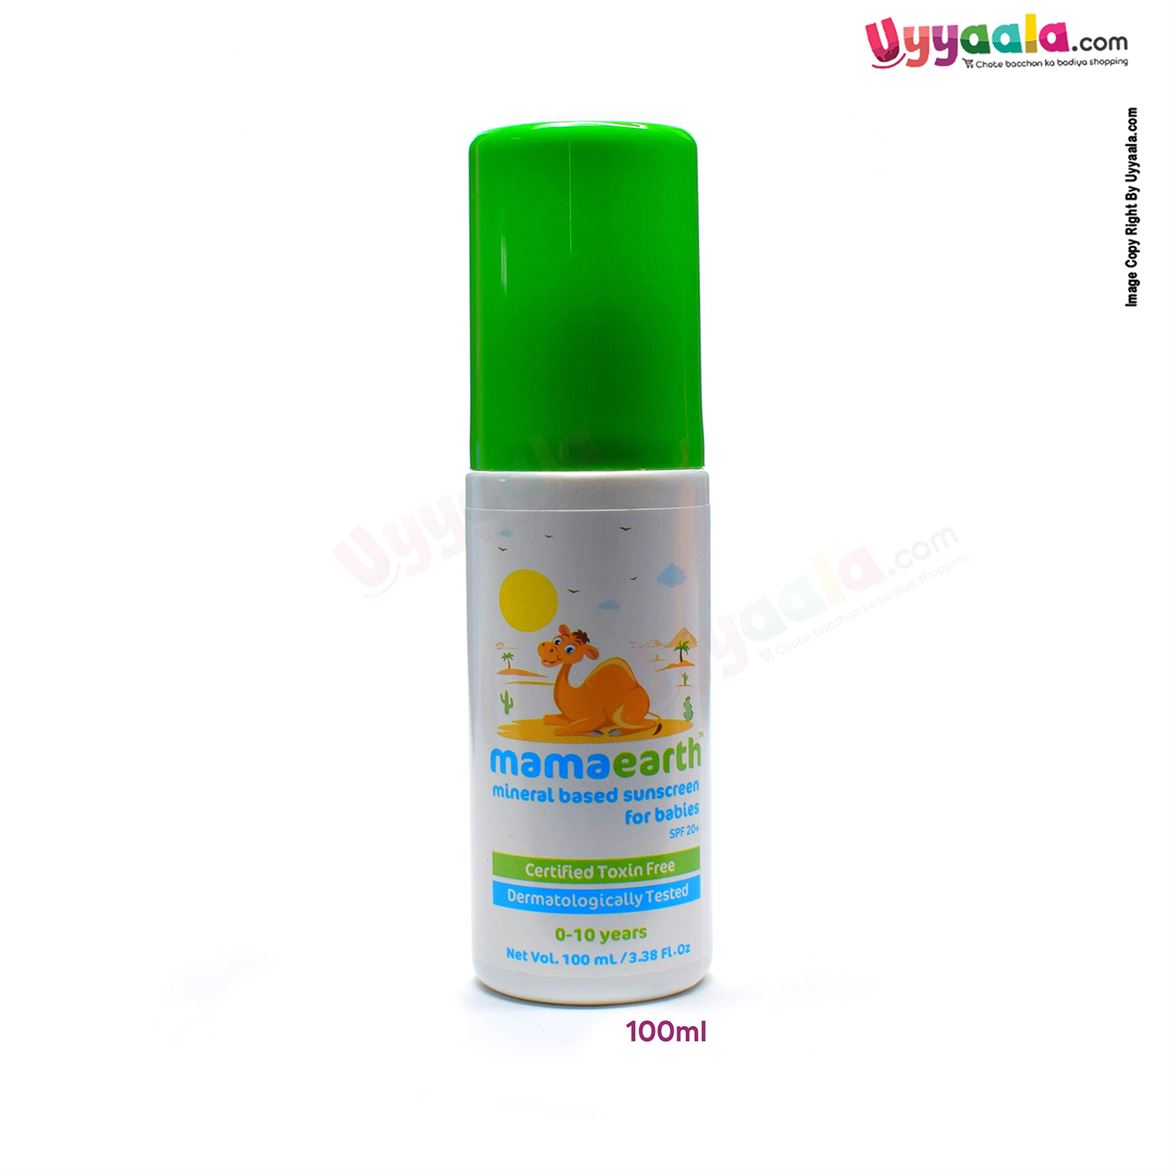 mamaearth Mineral Based Sunscreen For Babies